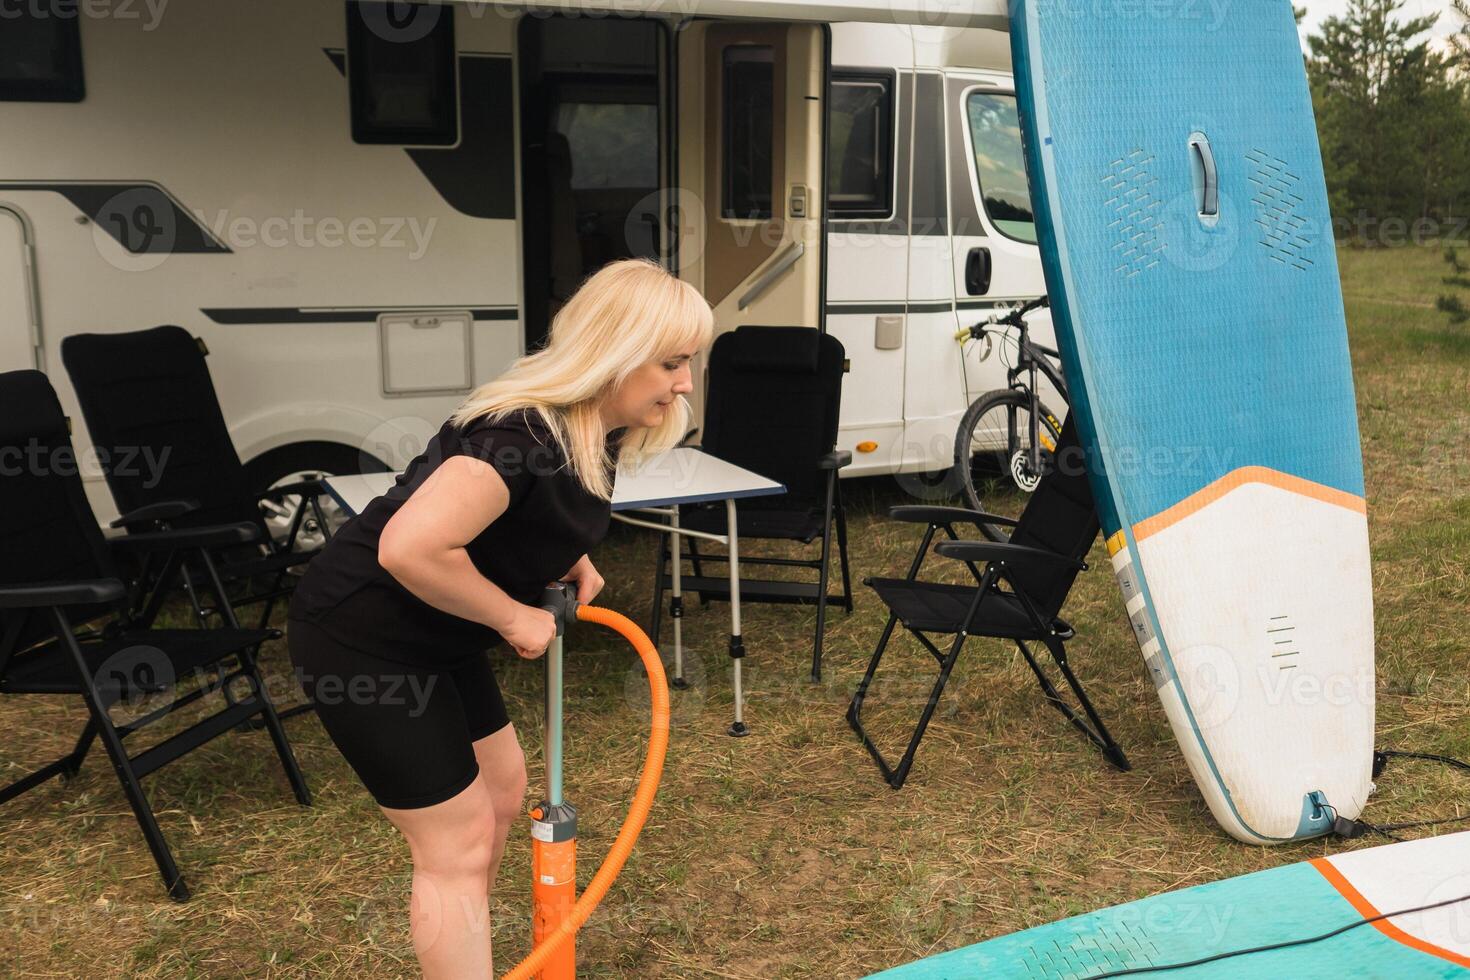 A woman inflates a sup-board for swimming near her motorhome photo